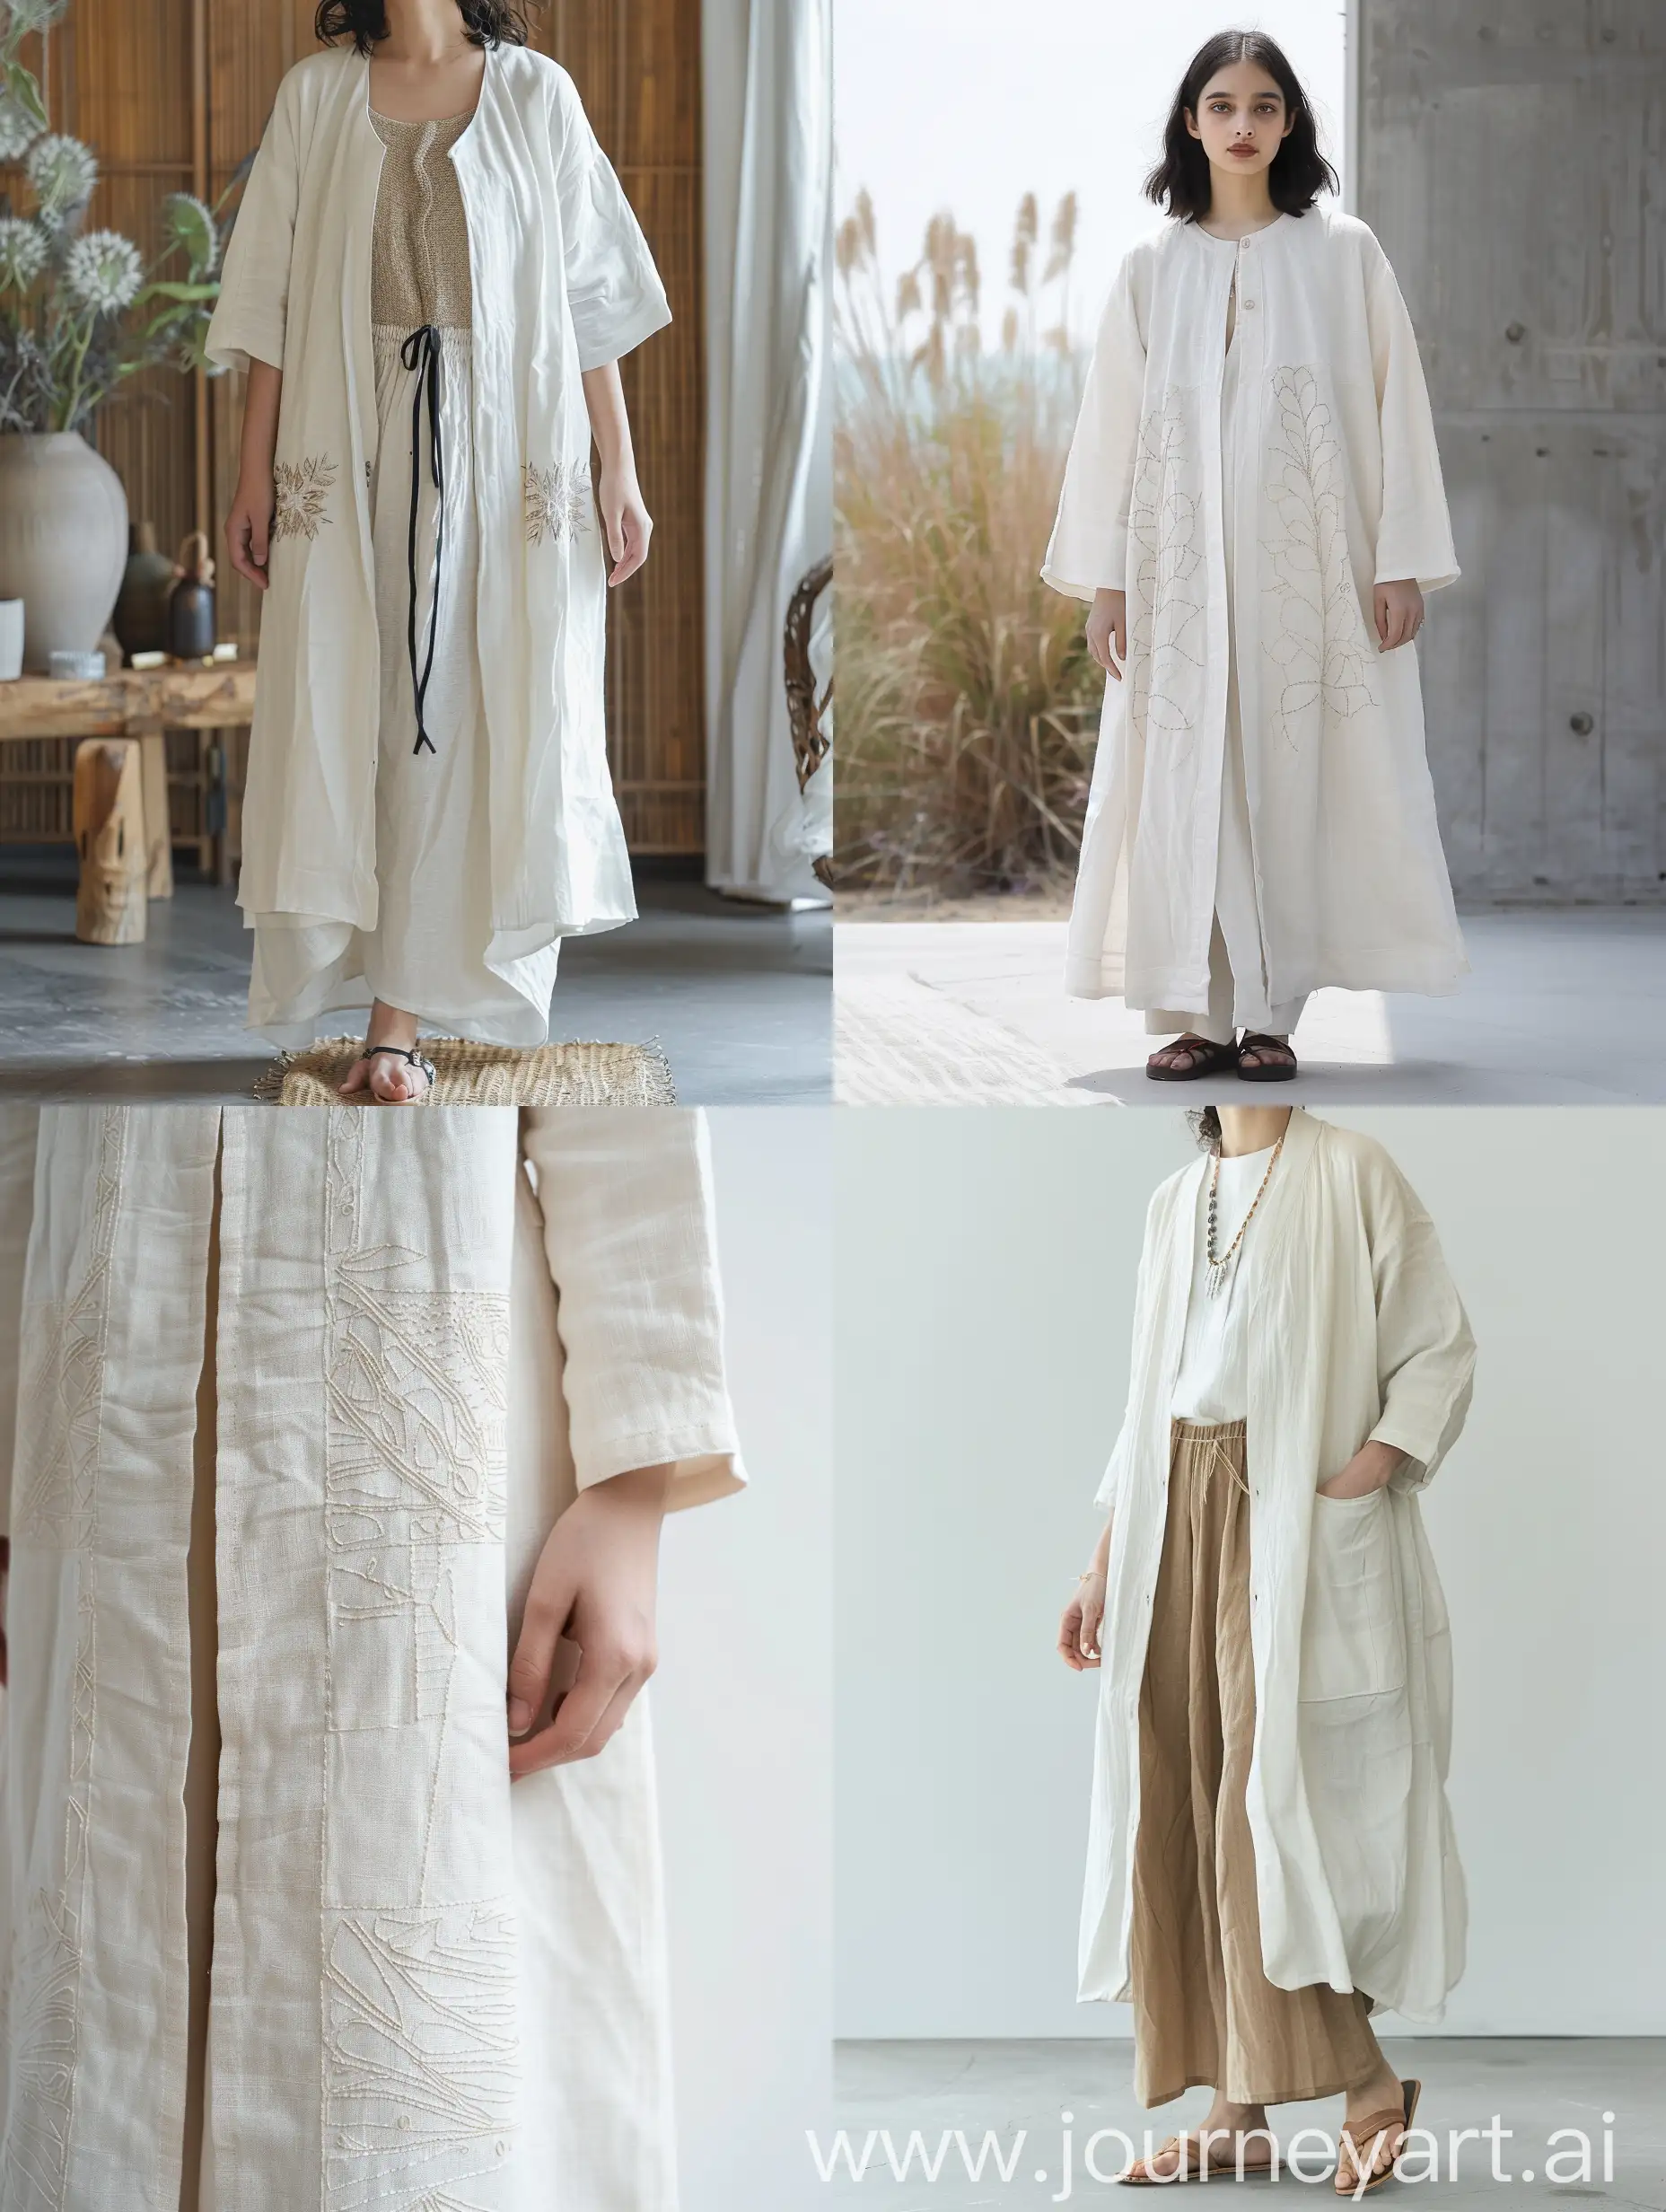 Short coat, linen material, cream color, handmade embroidery, simple and minimal embroidery, with a simple long dress.